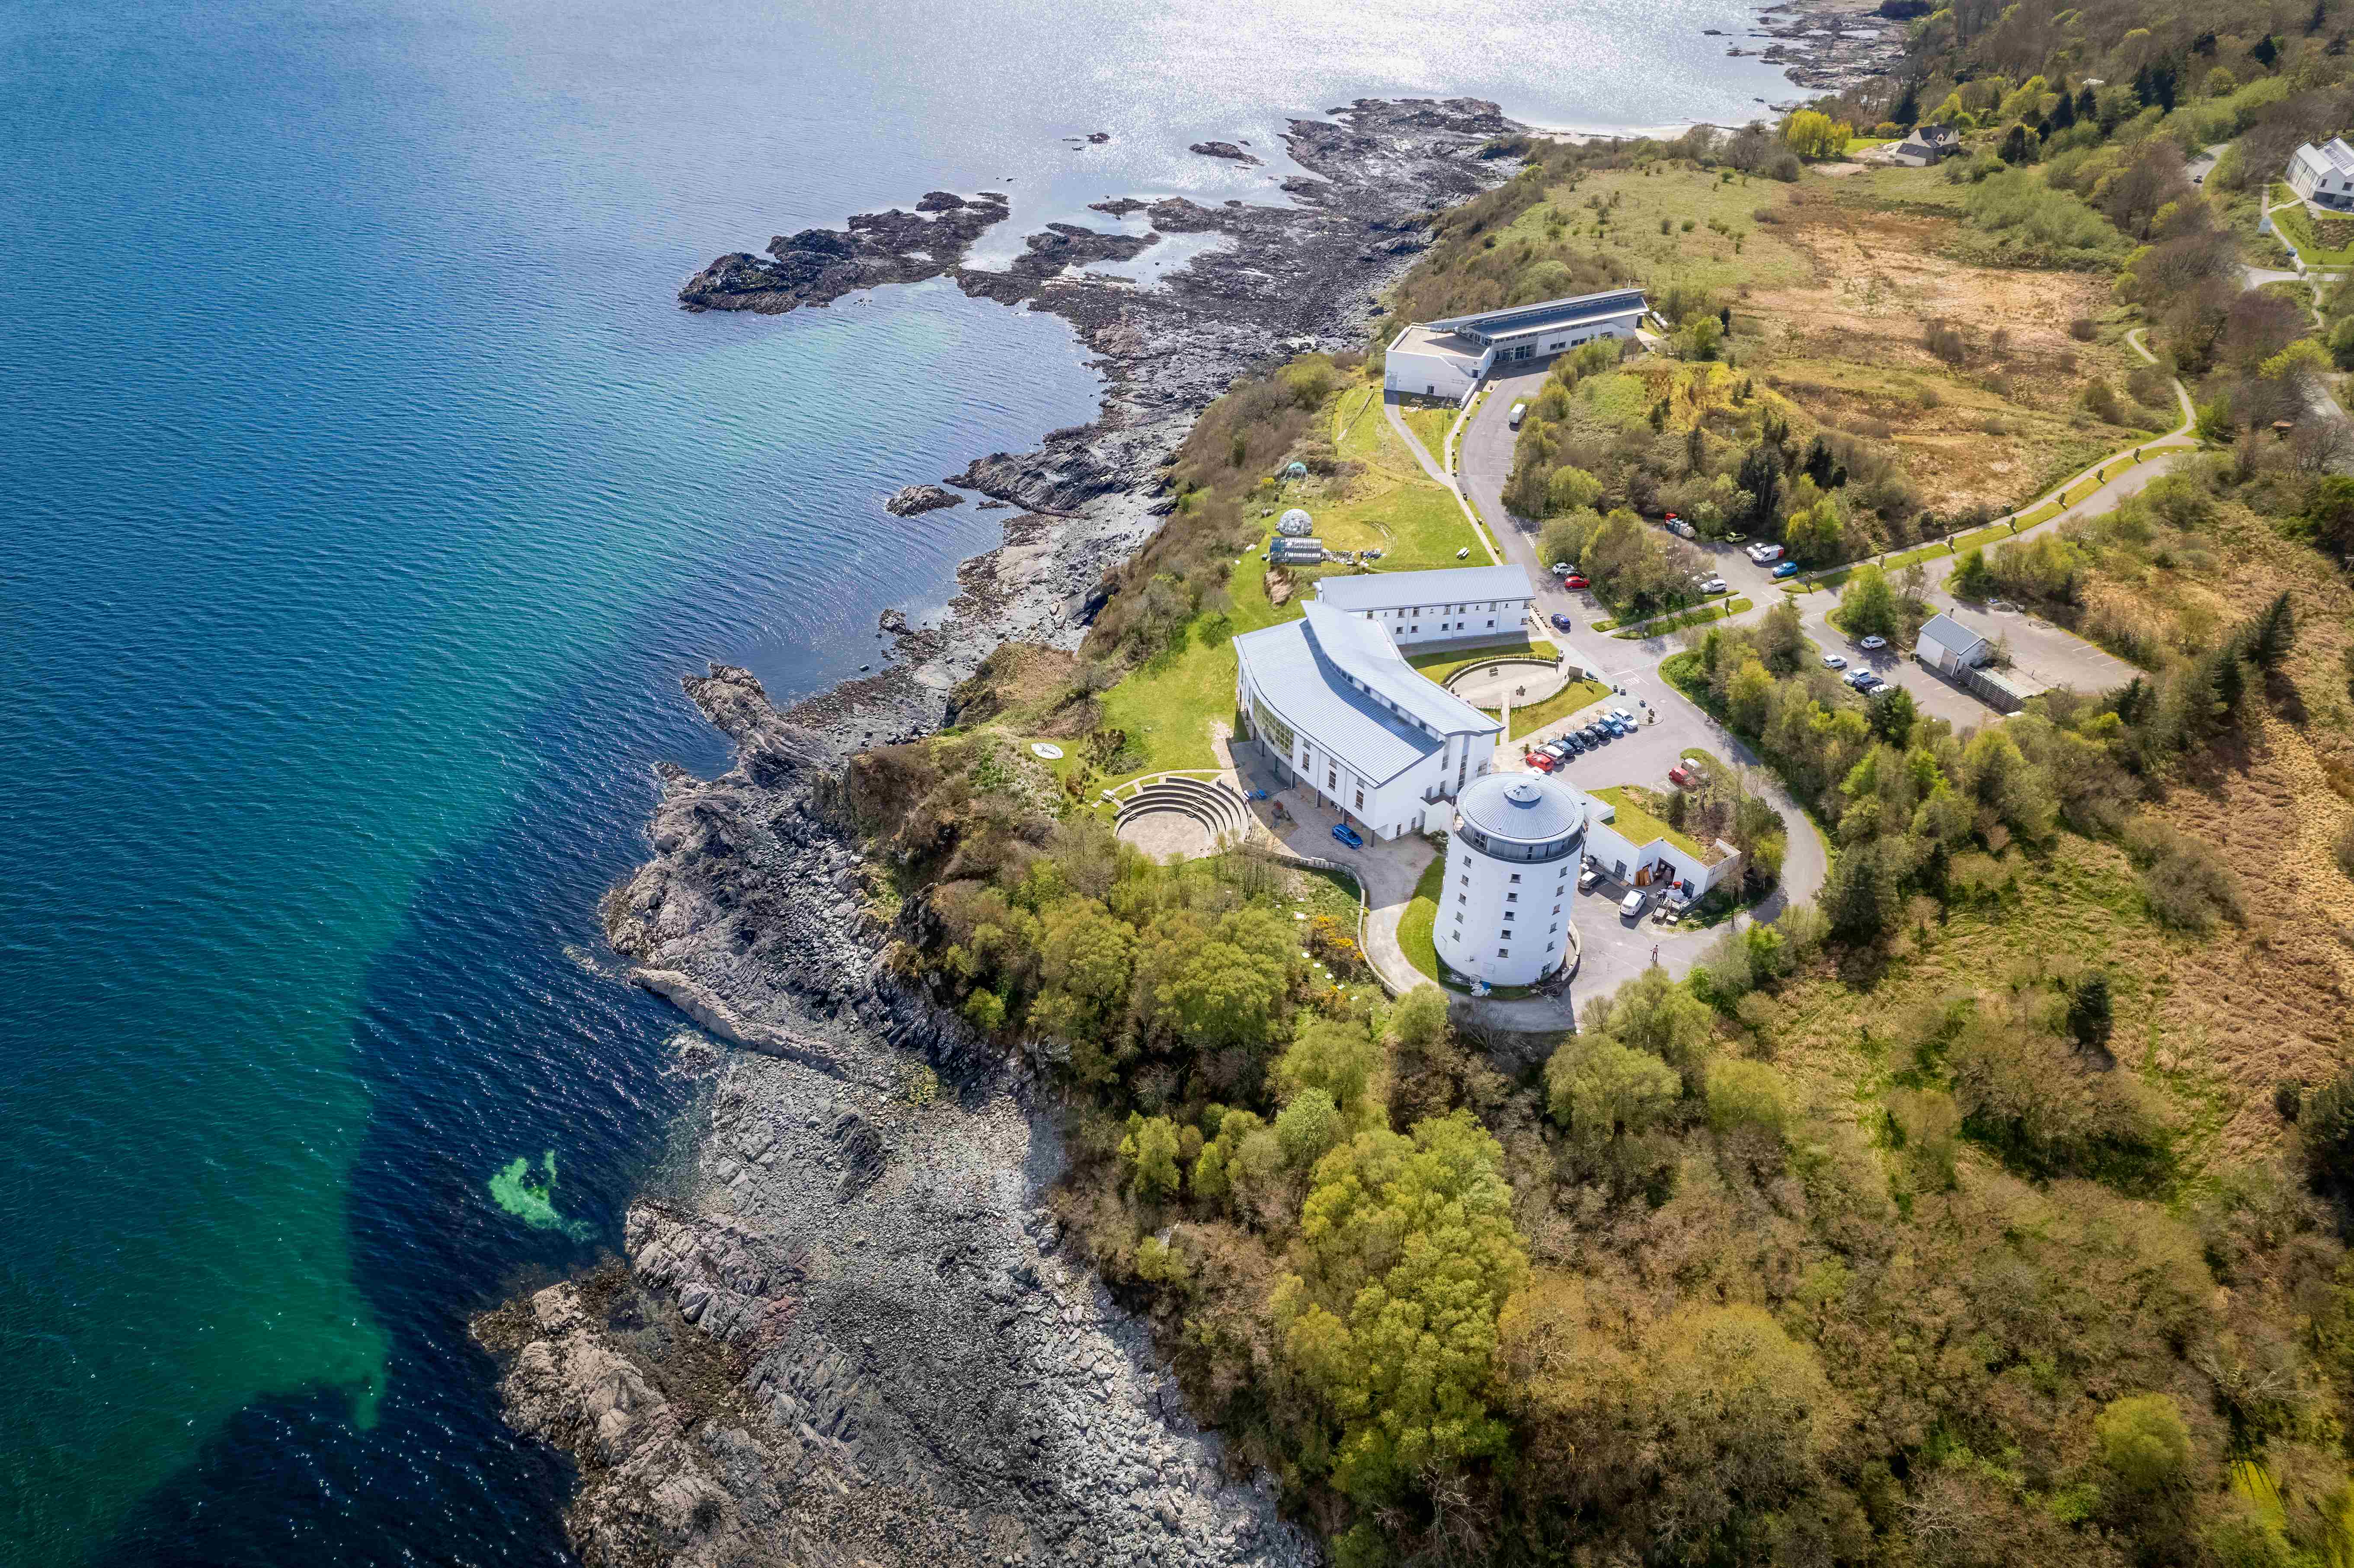 Aerial photo of a white building set by a rocky seashore, surrounded by greenery.